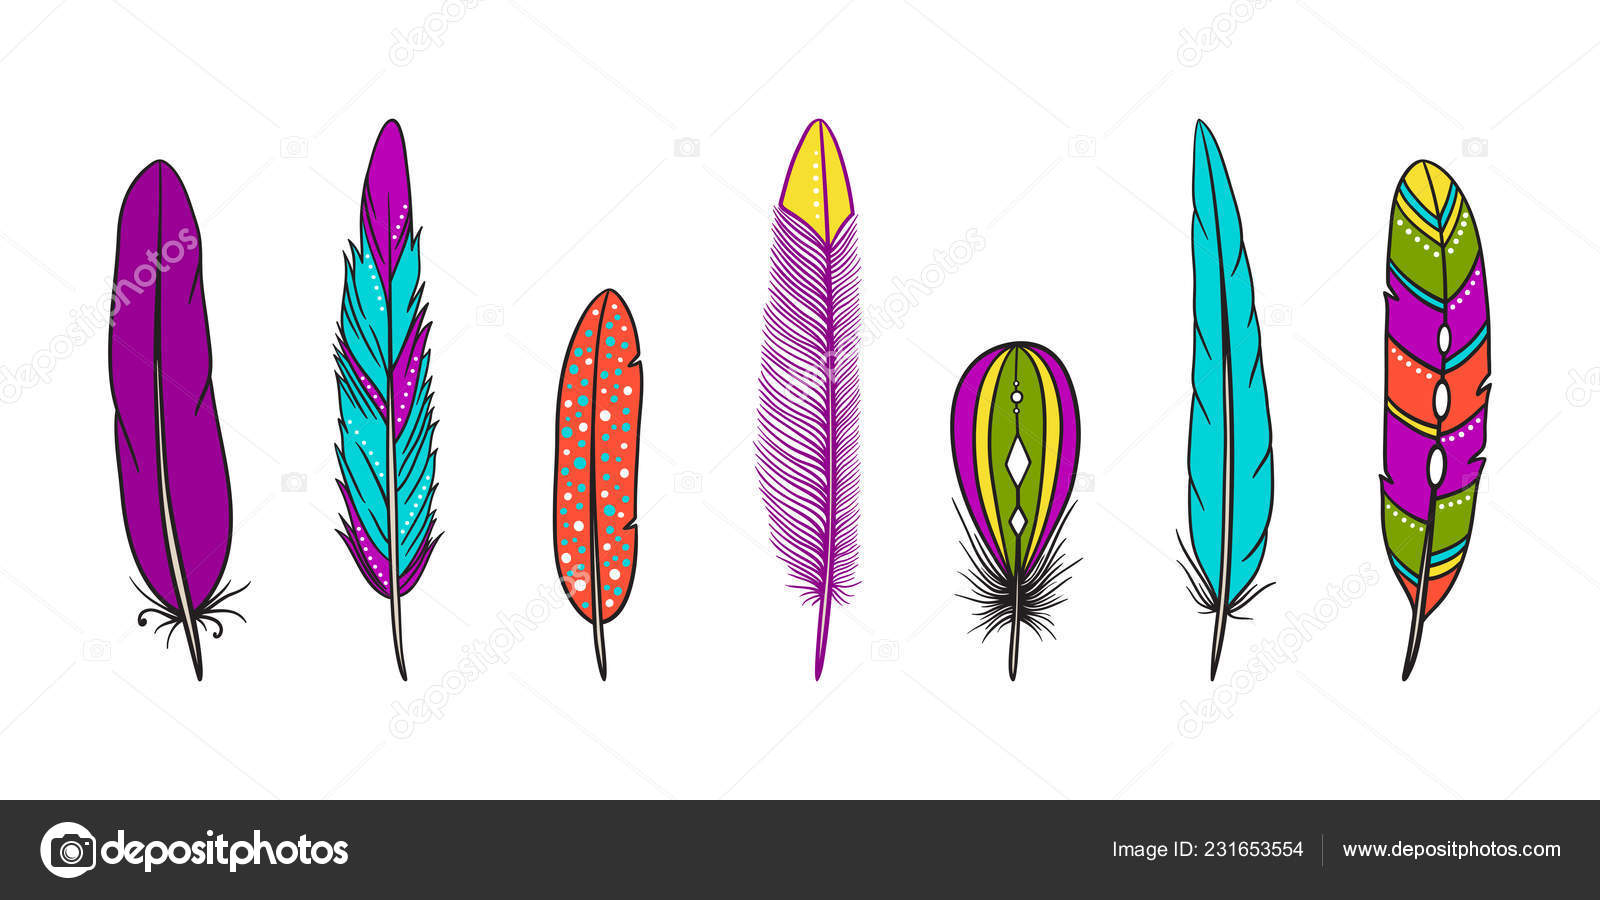 Clipart: feathers.